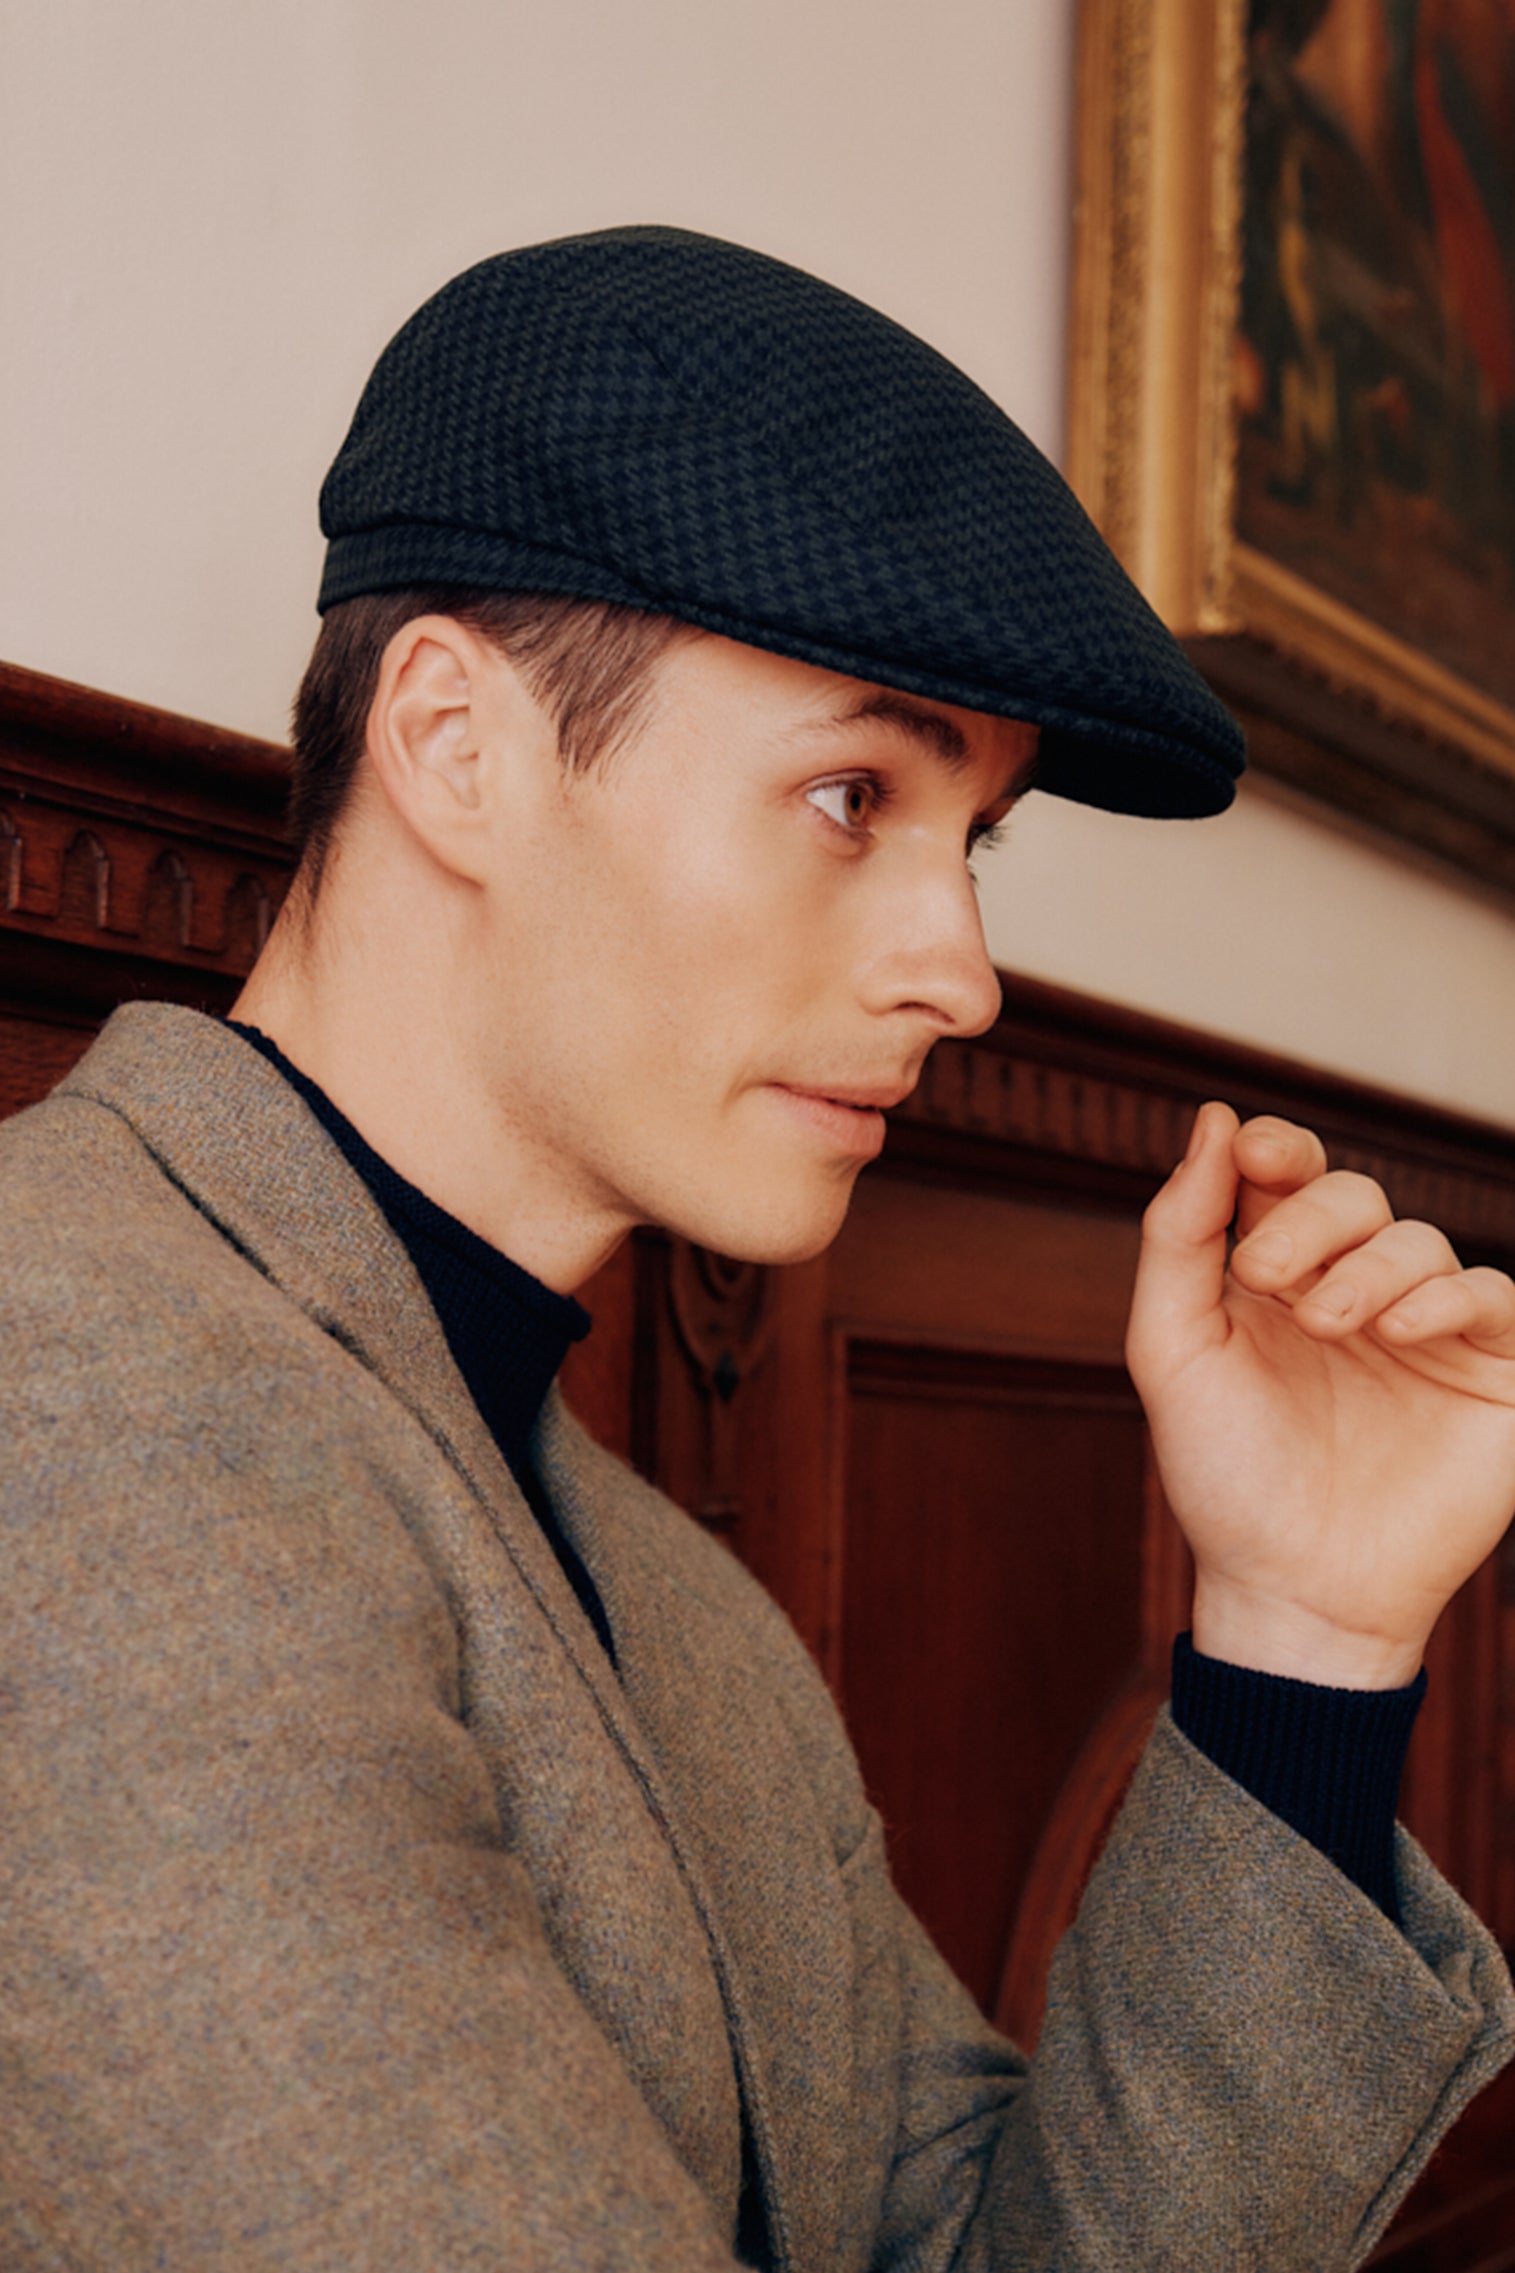 Grosvenor Houndstooth Flat Cap - Products - Lock & Co. Hatters London UK